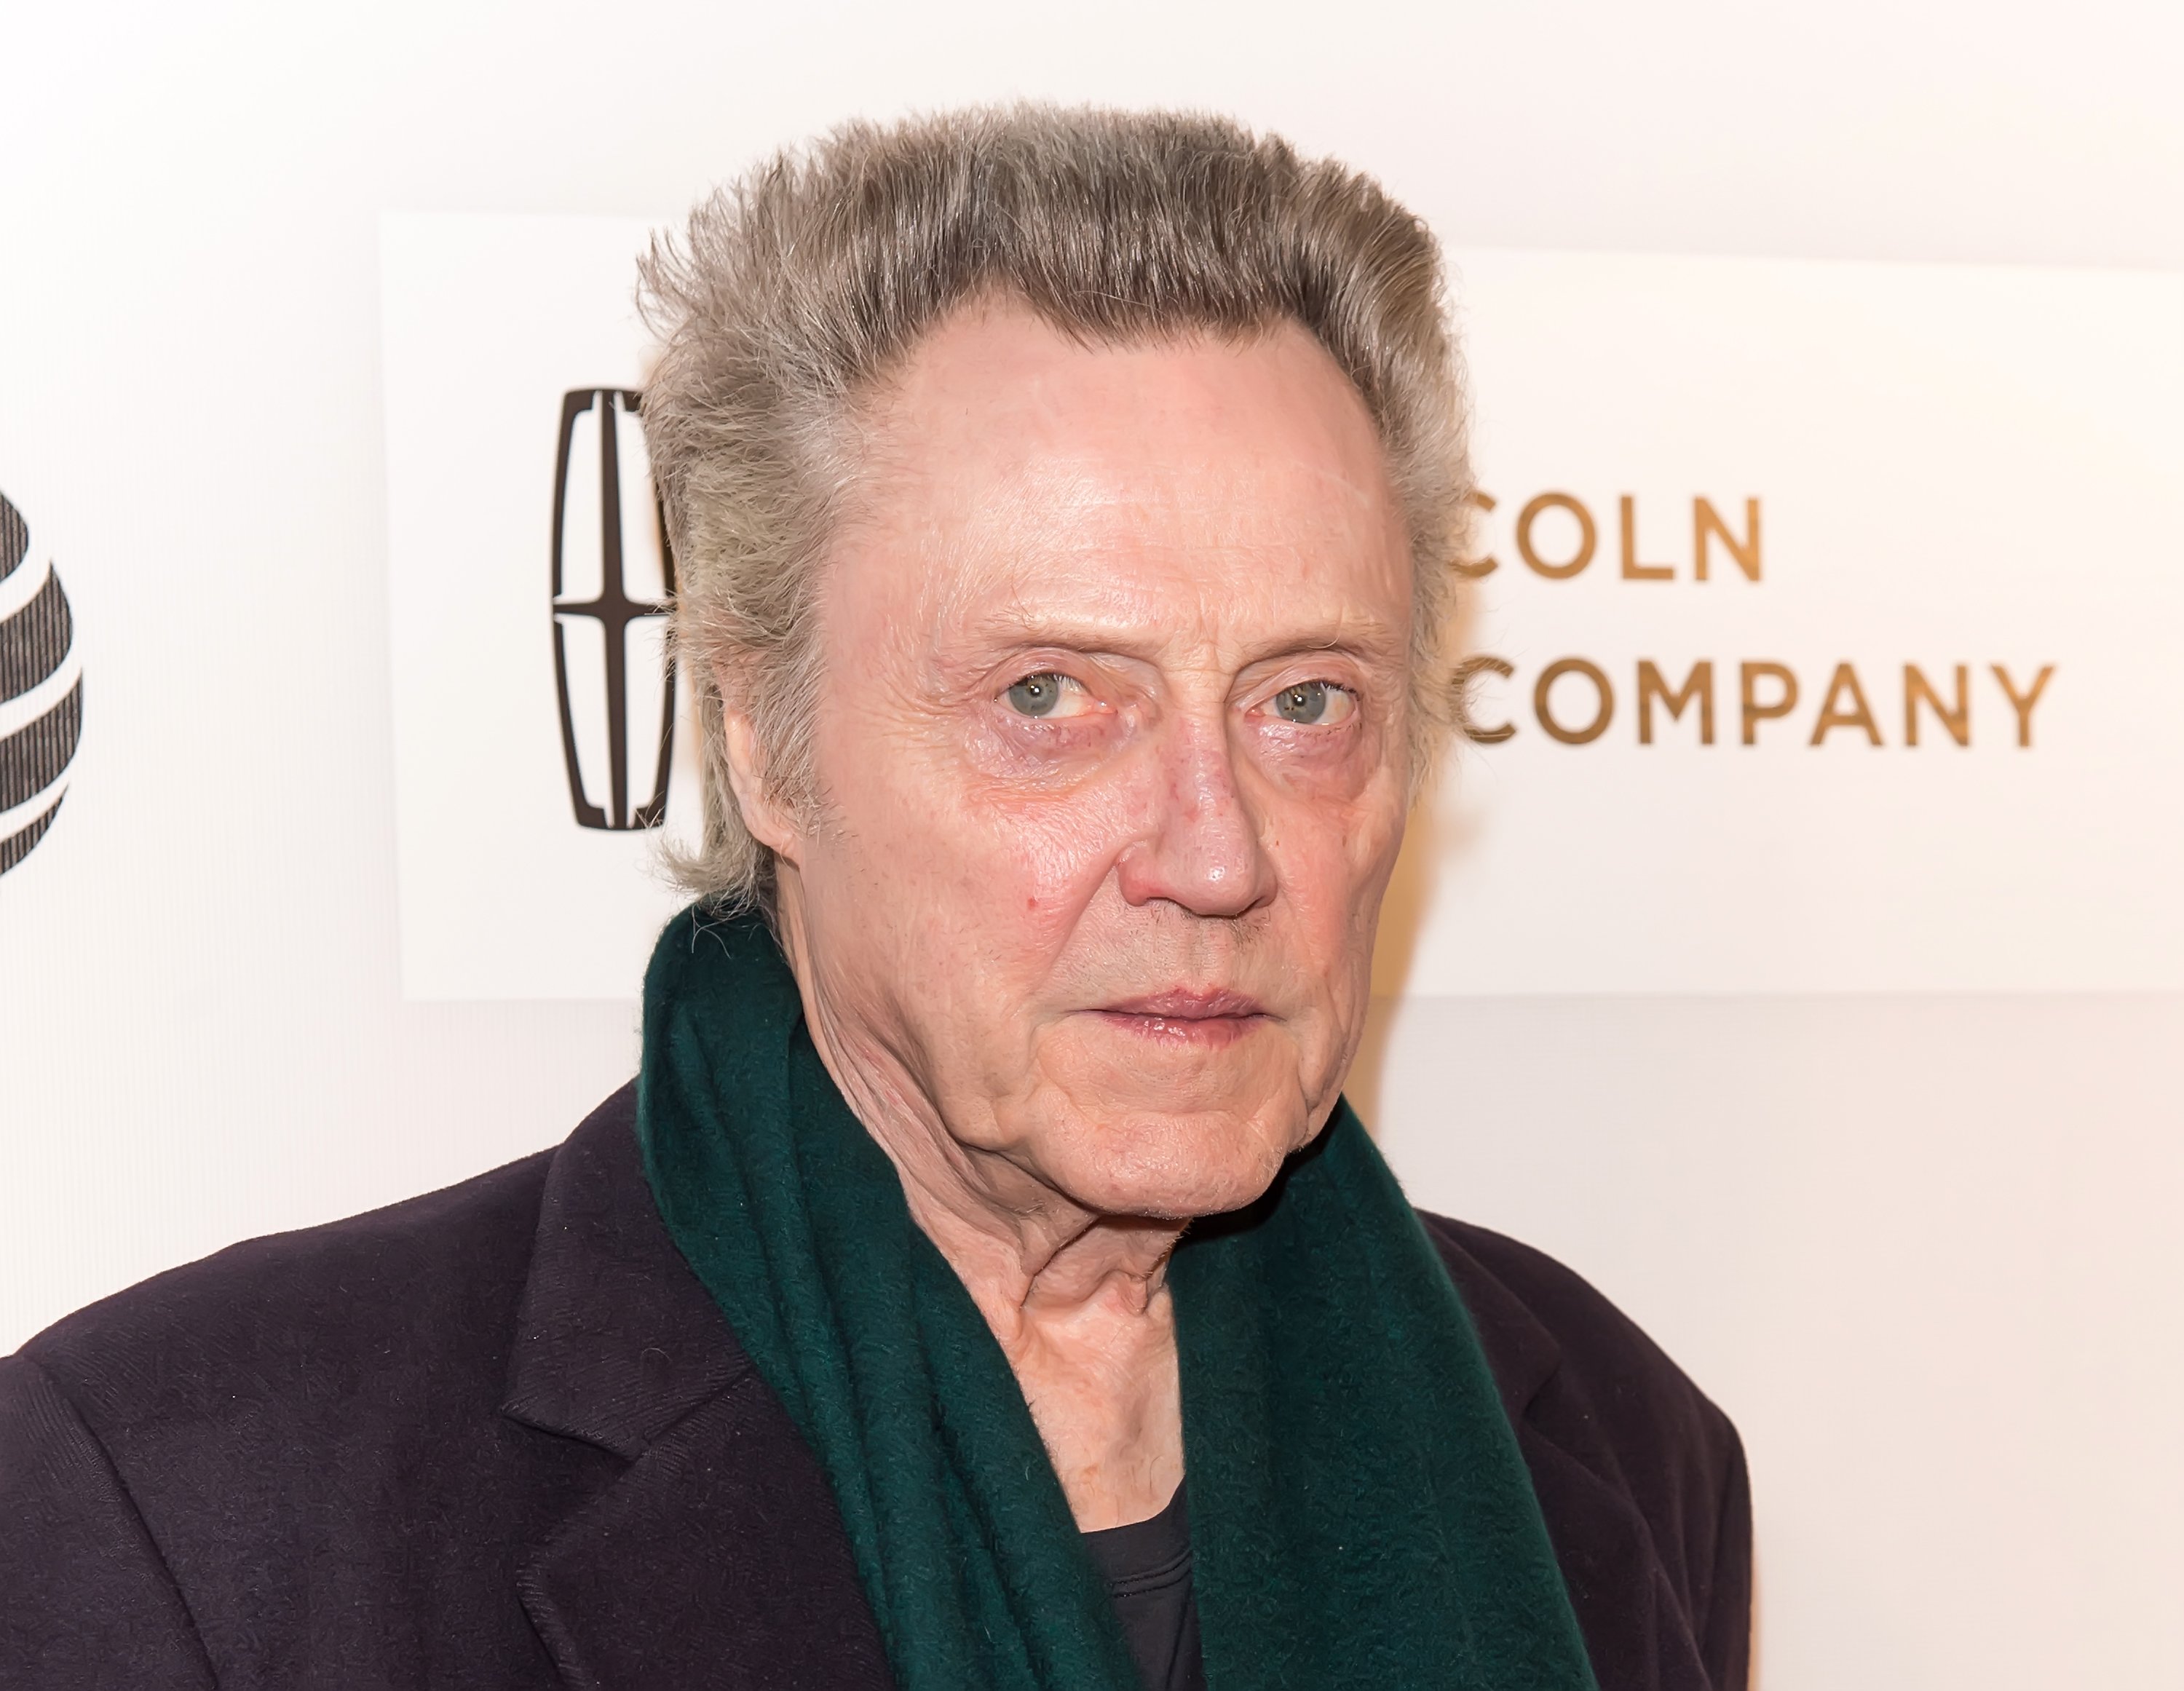 Christopher Walken at the premiere of "The Family Fang" during the 2016 Tribeca Film Festival on April 16, 2016 | Source: Getty Images